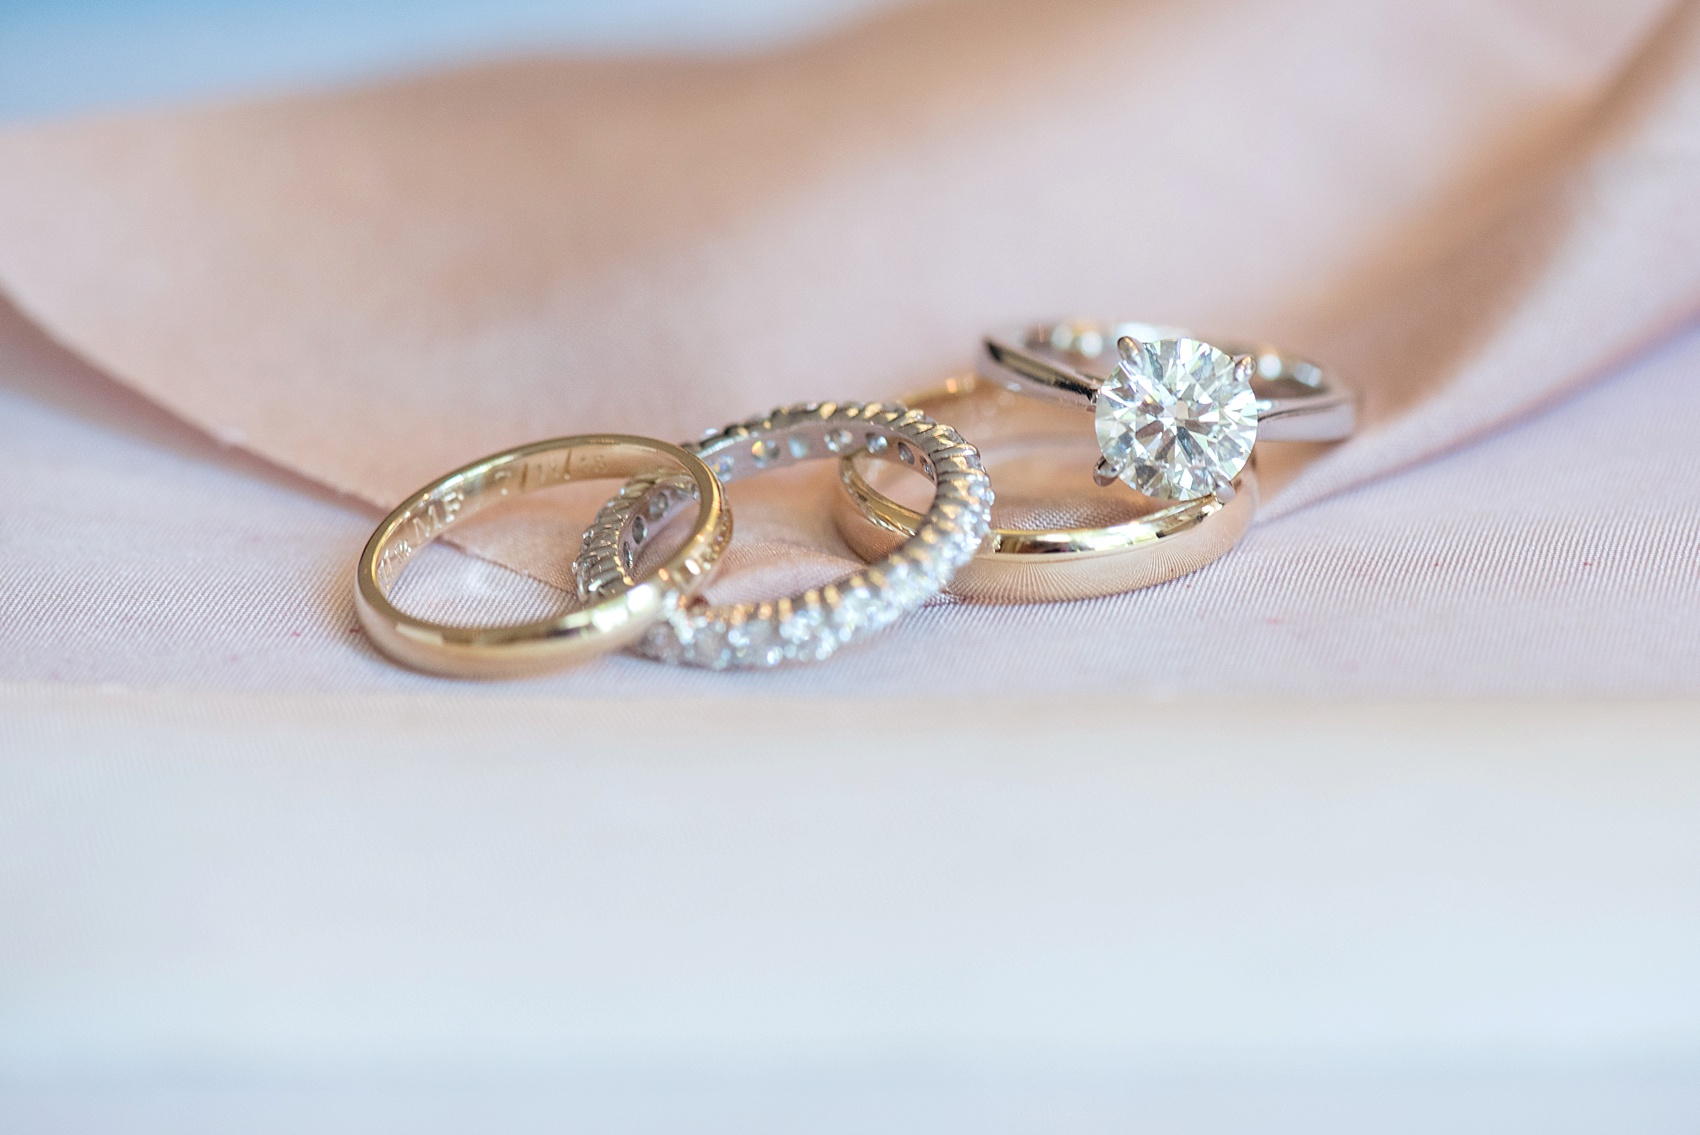 Ring shots for a Pearl River Hilton wedding photos. Images by Mikkel Paige Photography, NYC wedding photographer.